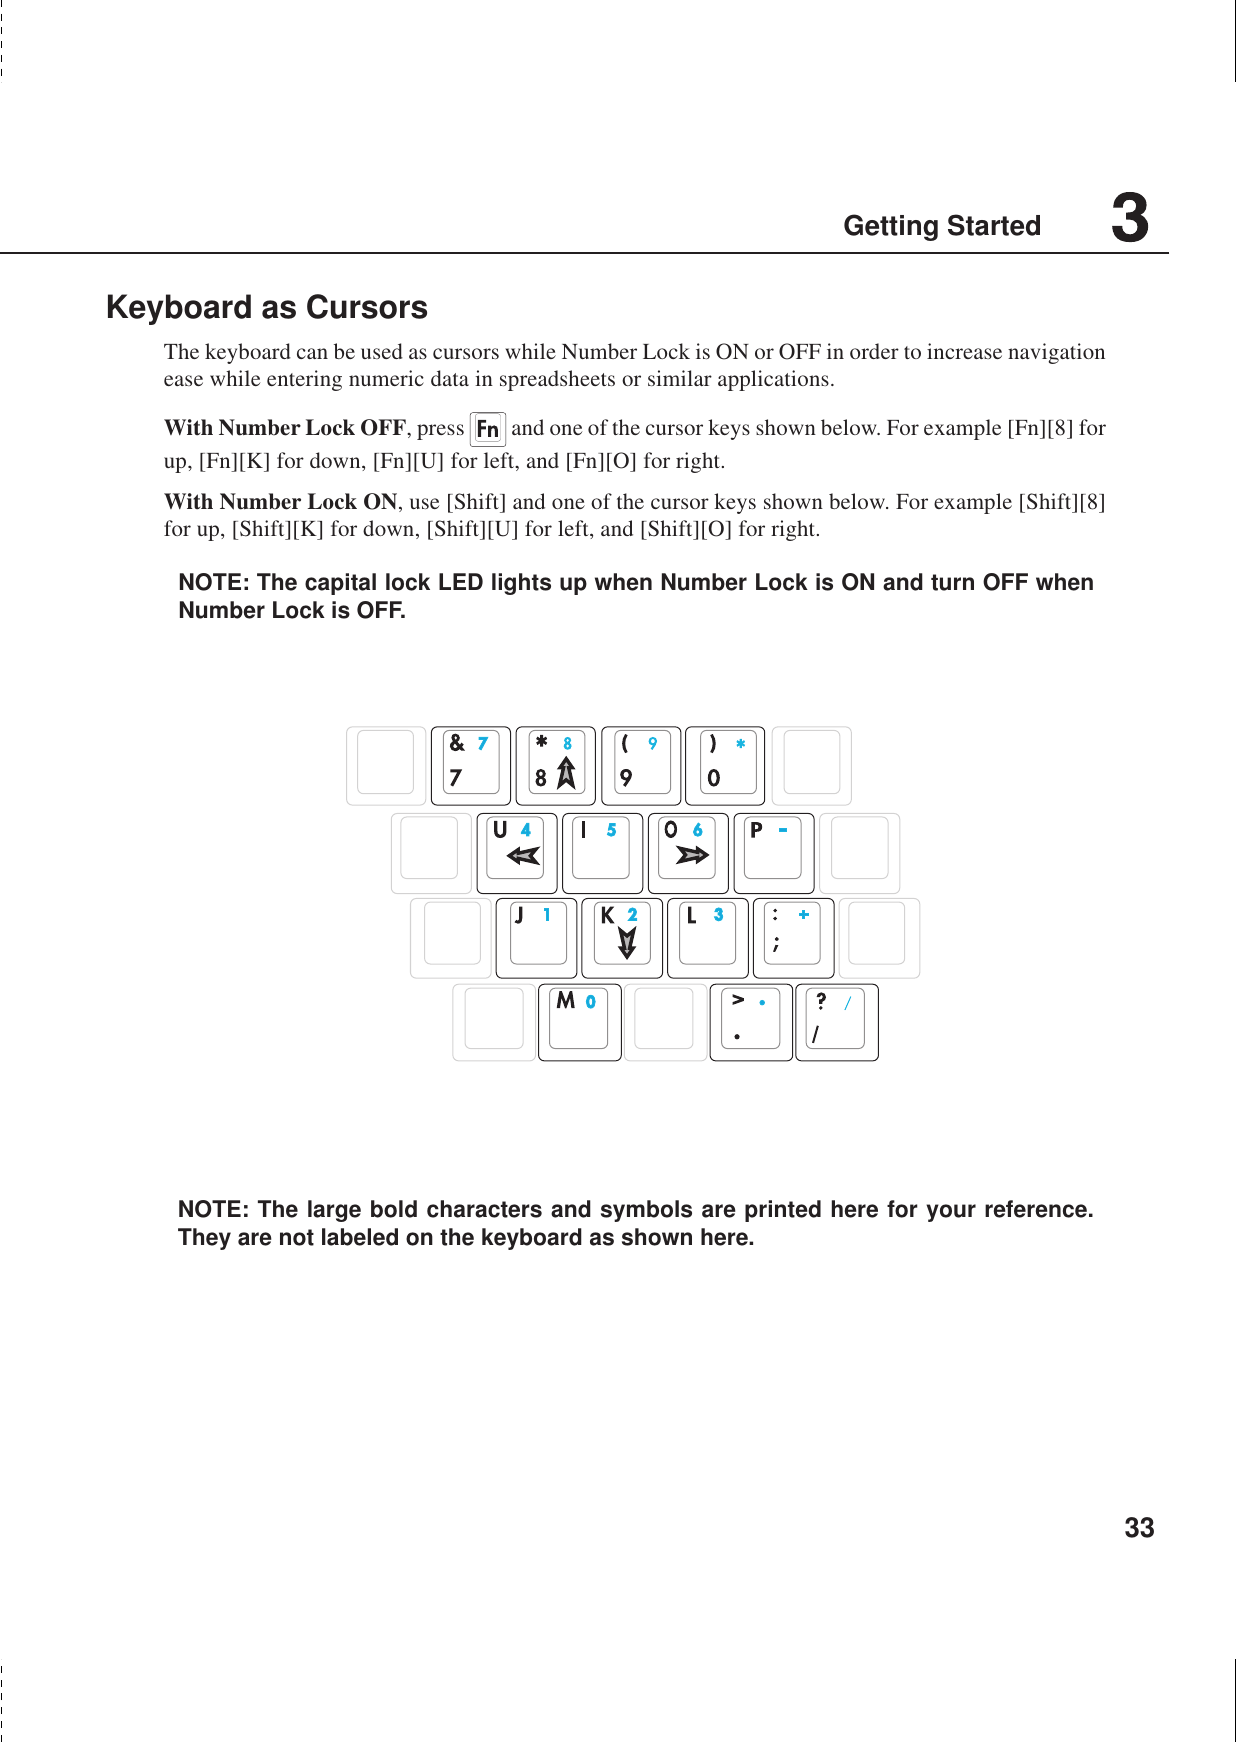 33Getting StartedKeyboard as CursorsThe keyboard can be used as cursors while Number Lock is ON or OFF in order to increase navigationease while entering numeric data in spreadsheets or similar applications.With Number Lock OFF, press   and one of the cursor keys shown below. For example [Fn][8] forup, [Fn][K] for down, [Fn][U] for left, and [Fn][O] for right.With Number Lock ON, use [Shift] and one of the cursor keys shown below. For example [Shift][8]for up, [Shift][K] for down, [Shift][U] for left, and [Shift][O] for right.NOTE: The large bold characters and symbols are printed here for your reference.They are not labeled on the keyboard as shown here.NOTE: The capital lock LED lights up when Number Lock is ON and turn OFF whenNumber Lock is OFF.